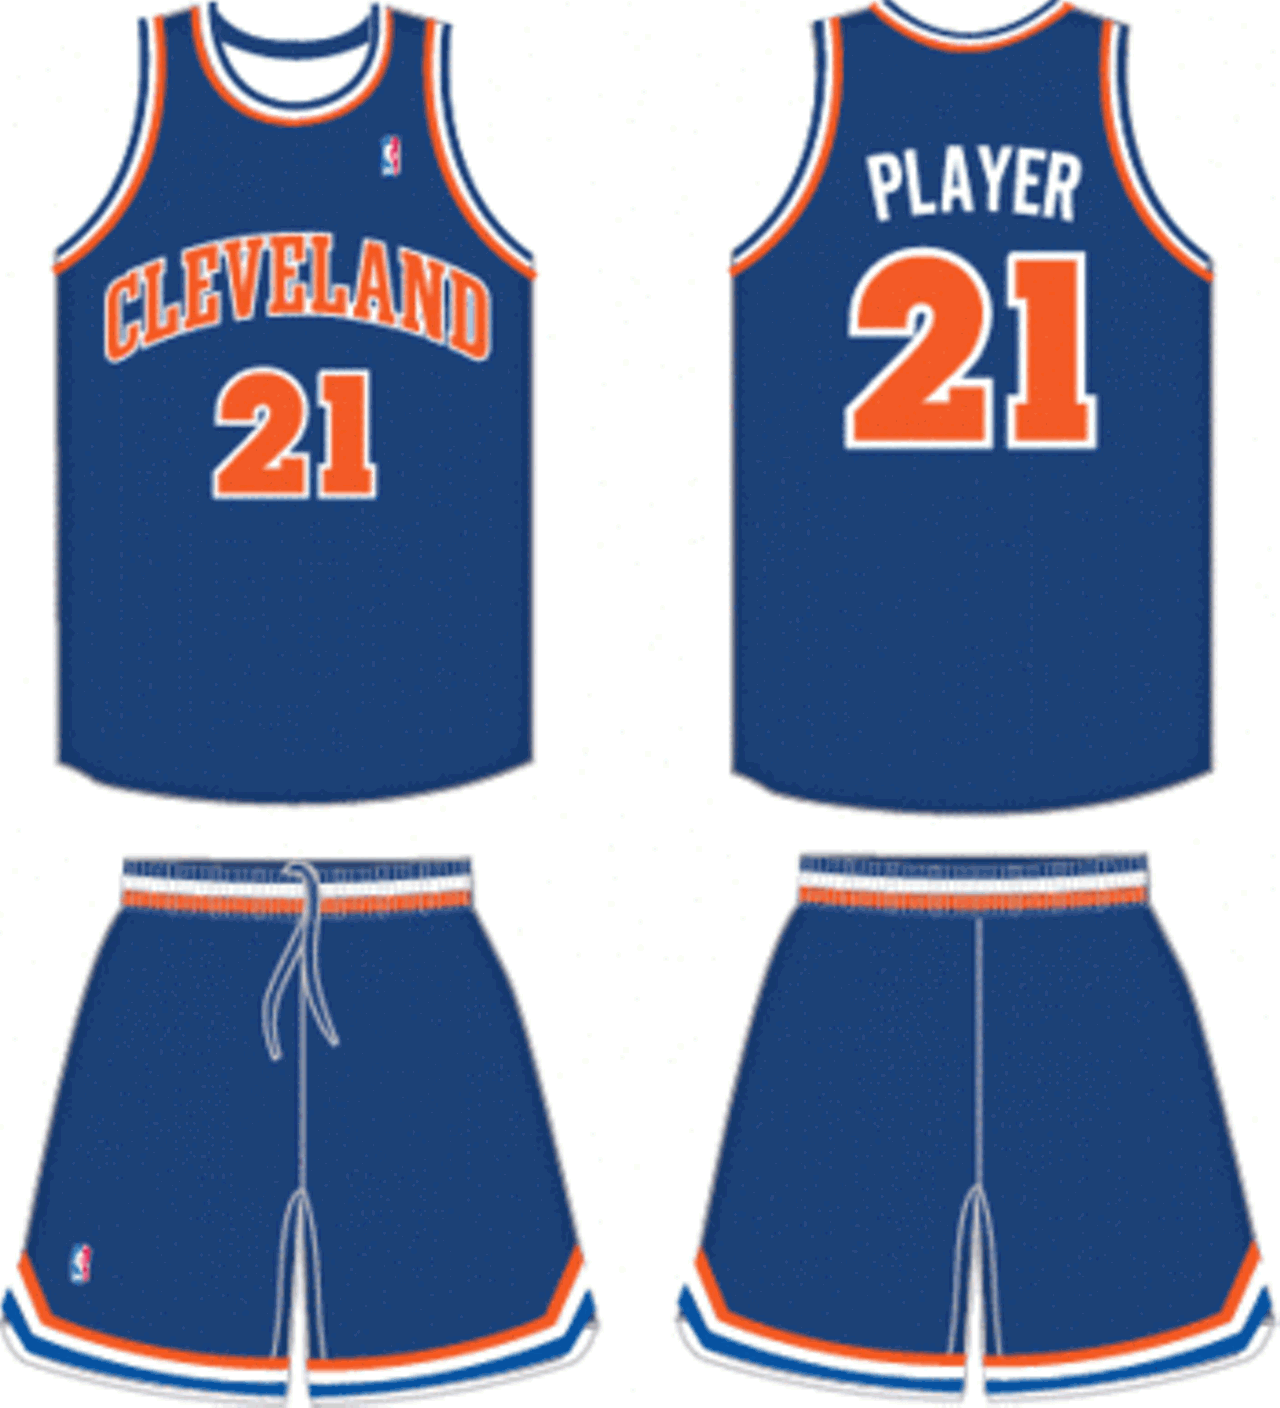 No. 6- For these uniforms, designers deliberately nixed the iconic "V" in Cavs, as a hoop with a ball going through it. Sad.